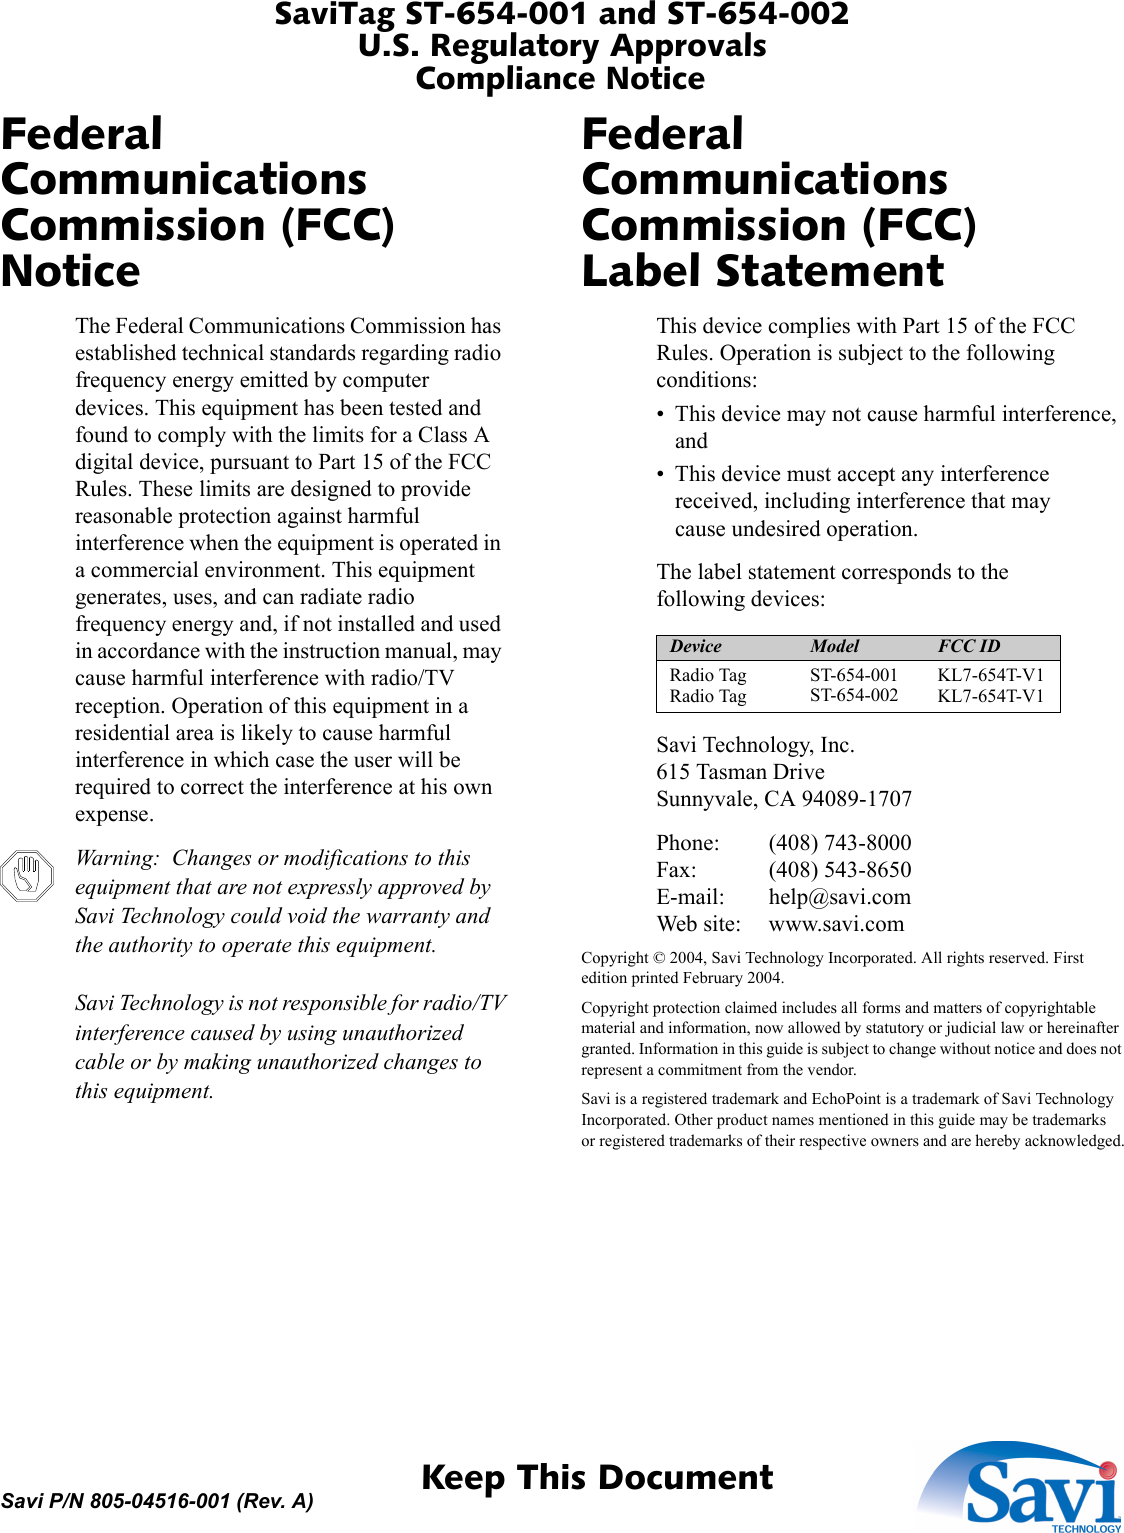 SaviTag ST-654-001 and ST-654-002U.S. Regulatory ApprovalsCompliance Notice 1  Keep This DocumentSavi P/N 805-04516-001 (Rev. A)Federal Communications Commission (FCC) NoticeThe Federal Communications Commission has established technical standards regarding radio frequency energy emitted by computer devices. This equipment has been tested and found to comply with the limits for a Class A digital device, pursuant to Part 15 of the FCC Rules. These limits are designed to provide reasonable protection against harmful interference when the equipment is operated in a commercial environment. This equipment generates, uses, and can radiate radio frequency energy and, if not installed and used in accordance with the instruction manual, may cause harmful interference with radio/TV reception. Operation of this equipment in a residential area is likely to cause harmful interference in which case the user will be required to correct the interference at his own expense.Warning:  Changes or modifications to this equipment that are not expressly approved by Savi Technology could void the warranty and the authority to operate this equipment.  Savi Technology is not responsible for radio/TV interference caused by using unauthorized cable or by making unauthorized changes to this equipment.Federal Communications Commission (FCC) Label StatementThis device complies with Part 15 of the FCC Rules. Operation is subject to the following conditions:• This device may not cause harmful interference, and• This device must accept any interference received, including interference that may cause undesired operation.The label statement corresponds to the following devices:Savi Technology, Inc. 615 Tasman Drive Sunnyvale, CA 94089-1707Phone: (408) 743-8000 Fax: (408) 543-8650 E-mail: help@savi.com Web site: www.savi.comCopyright © 2004, Savi Technology Incorporated. All rights reserved. First edition printed February 2004.Copyright protection claimed includes all forms and matters of copyrightable material and information, now allowed by statutory or judicial law or hereinafter granted. Information in this guide is subject to change without notice and does not represent a commitment from the vendor.Savi is a registered trademark and EchoPoint is a trademark of Savi Technology Incorporated. Other product names mentioned in this guide may be trademarks or registered trademarks of their respective owners and are hereby acknowledged.Device Model FCC IDRadio Tag Radio TagST-654-001 ST-654-002 KL7-654T-V1 KL7-654T-V1